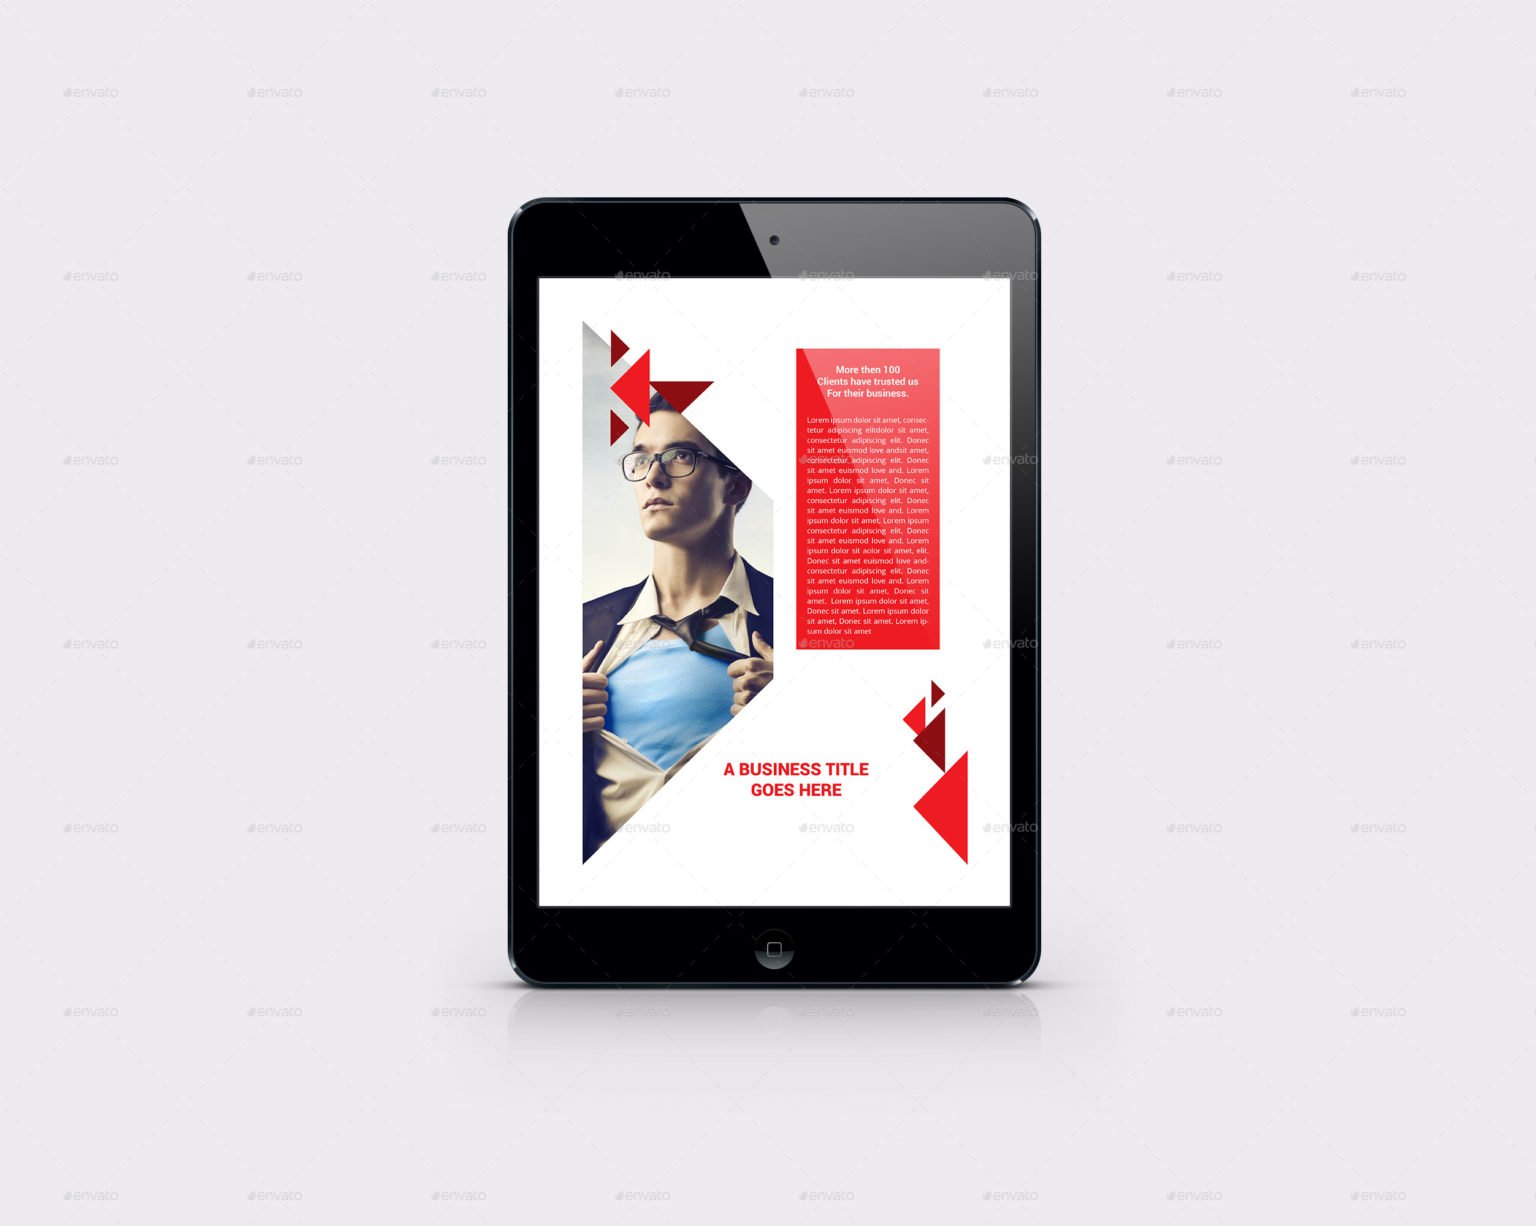 Download eBook Mockup | 20+ Creative PSD, InDesign .INDD and .IDML ...